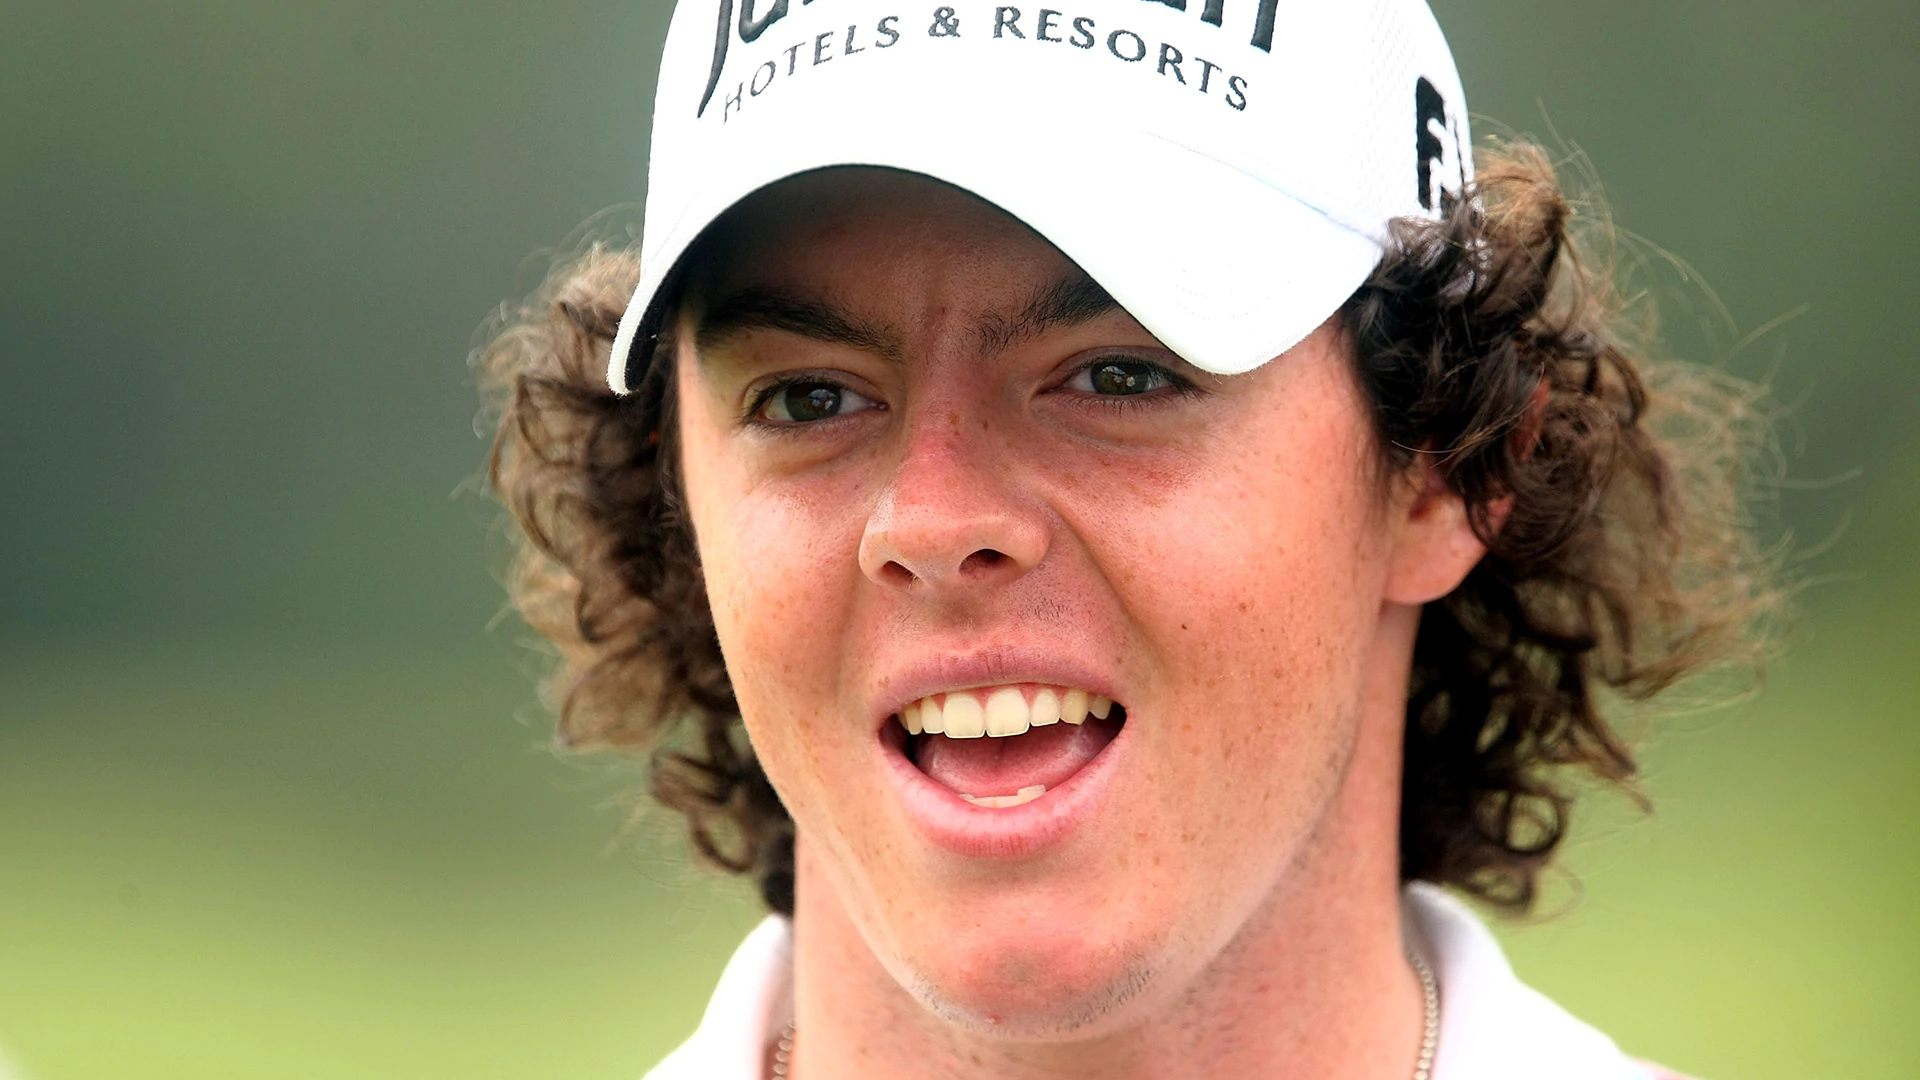 Players champ Rory recalls being kicked out of Jax Beach bars at 19